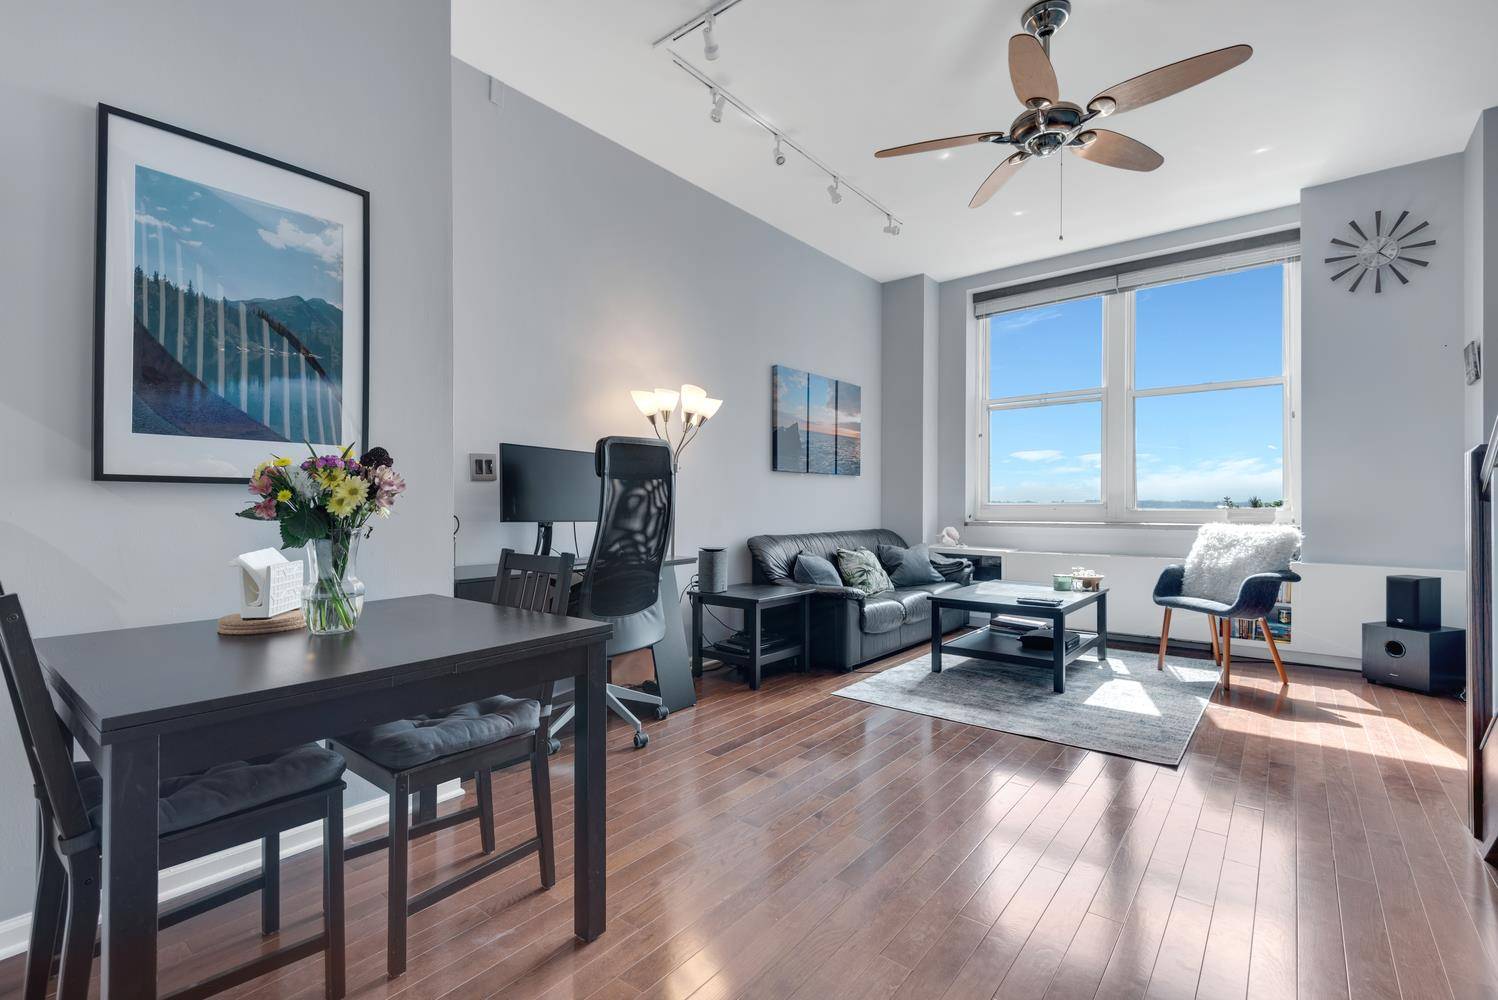 ALL SHOWINGS AND OPEN HOUSES ARE BY APPOINTMENT ONLY Experience chic Downtown Brooklyn living in this beautifully designed one bedroom, one and a half bath duplex penthouse at 96 Schermerhorn ...